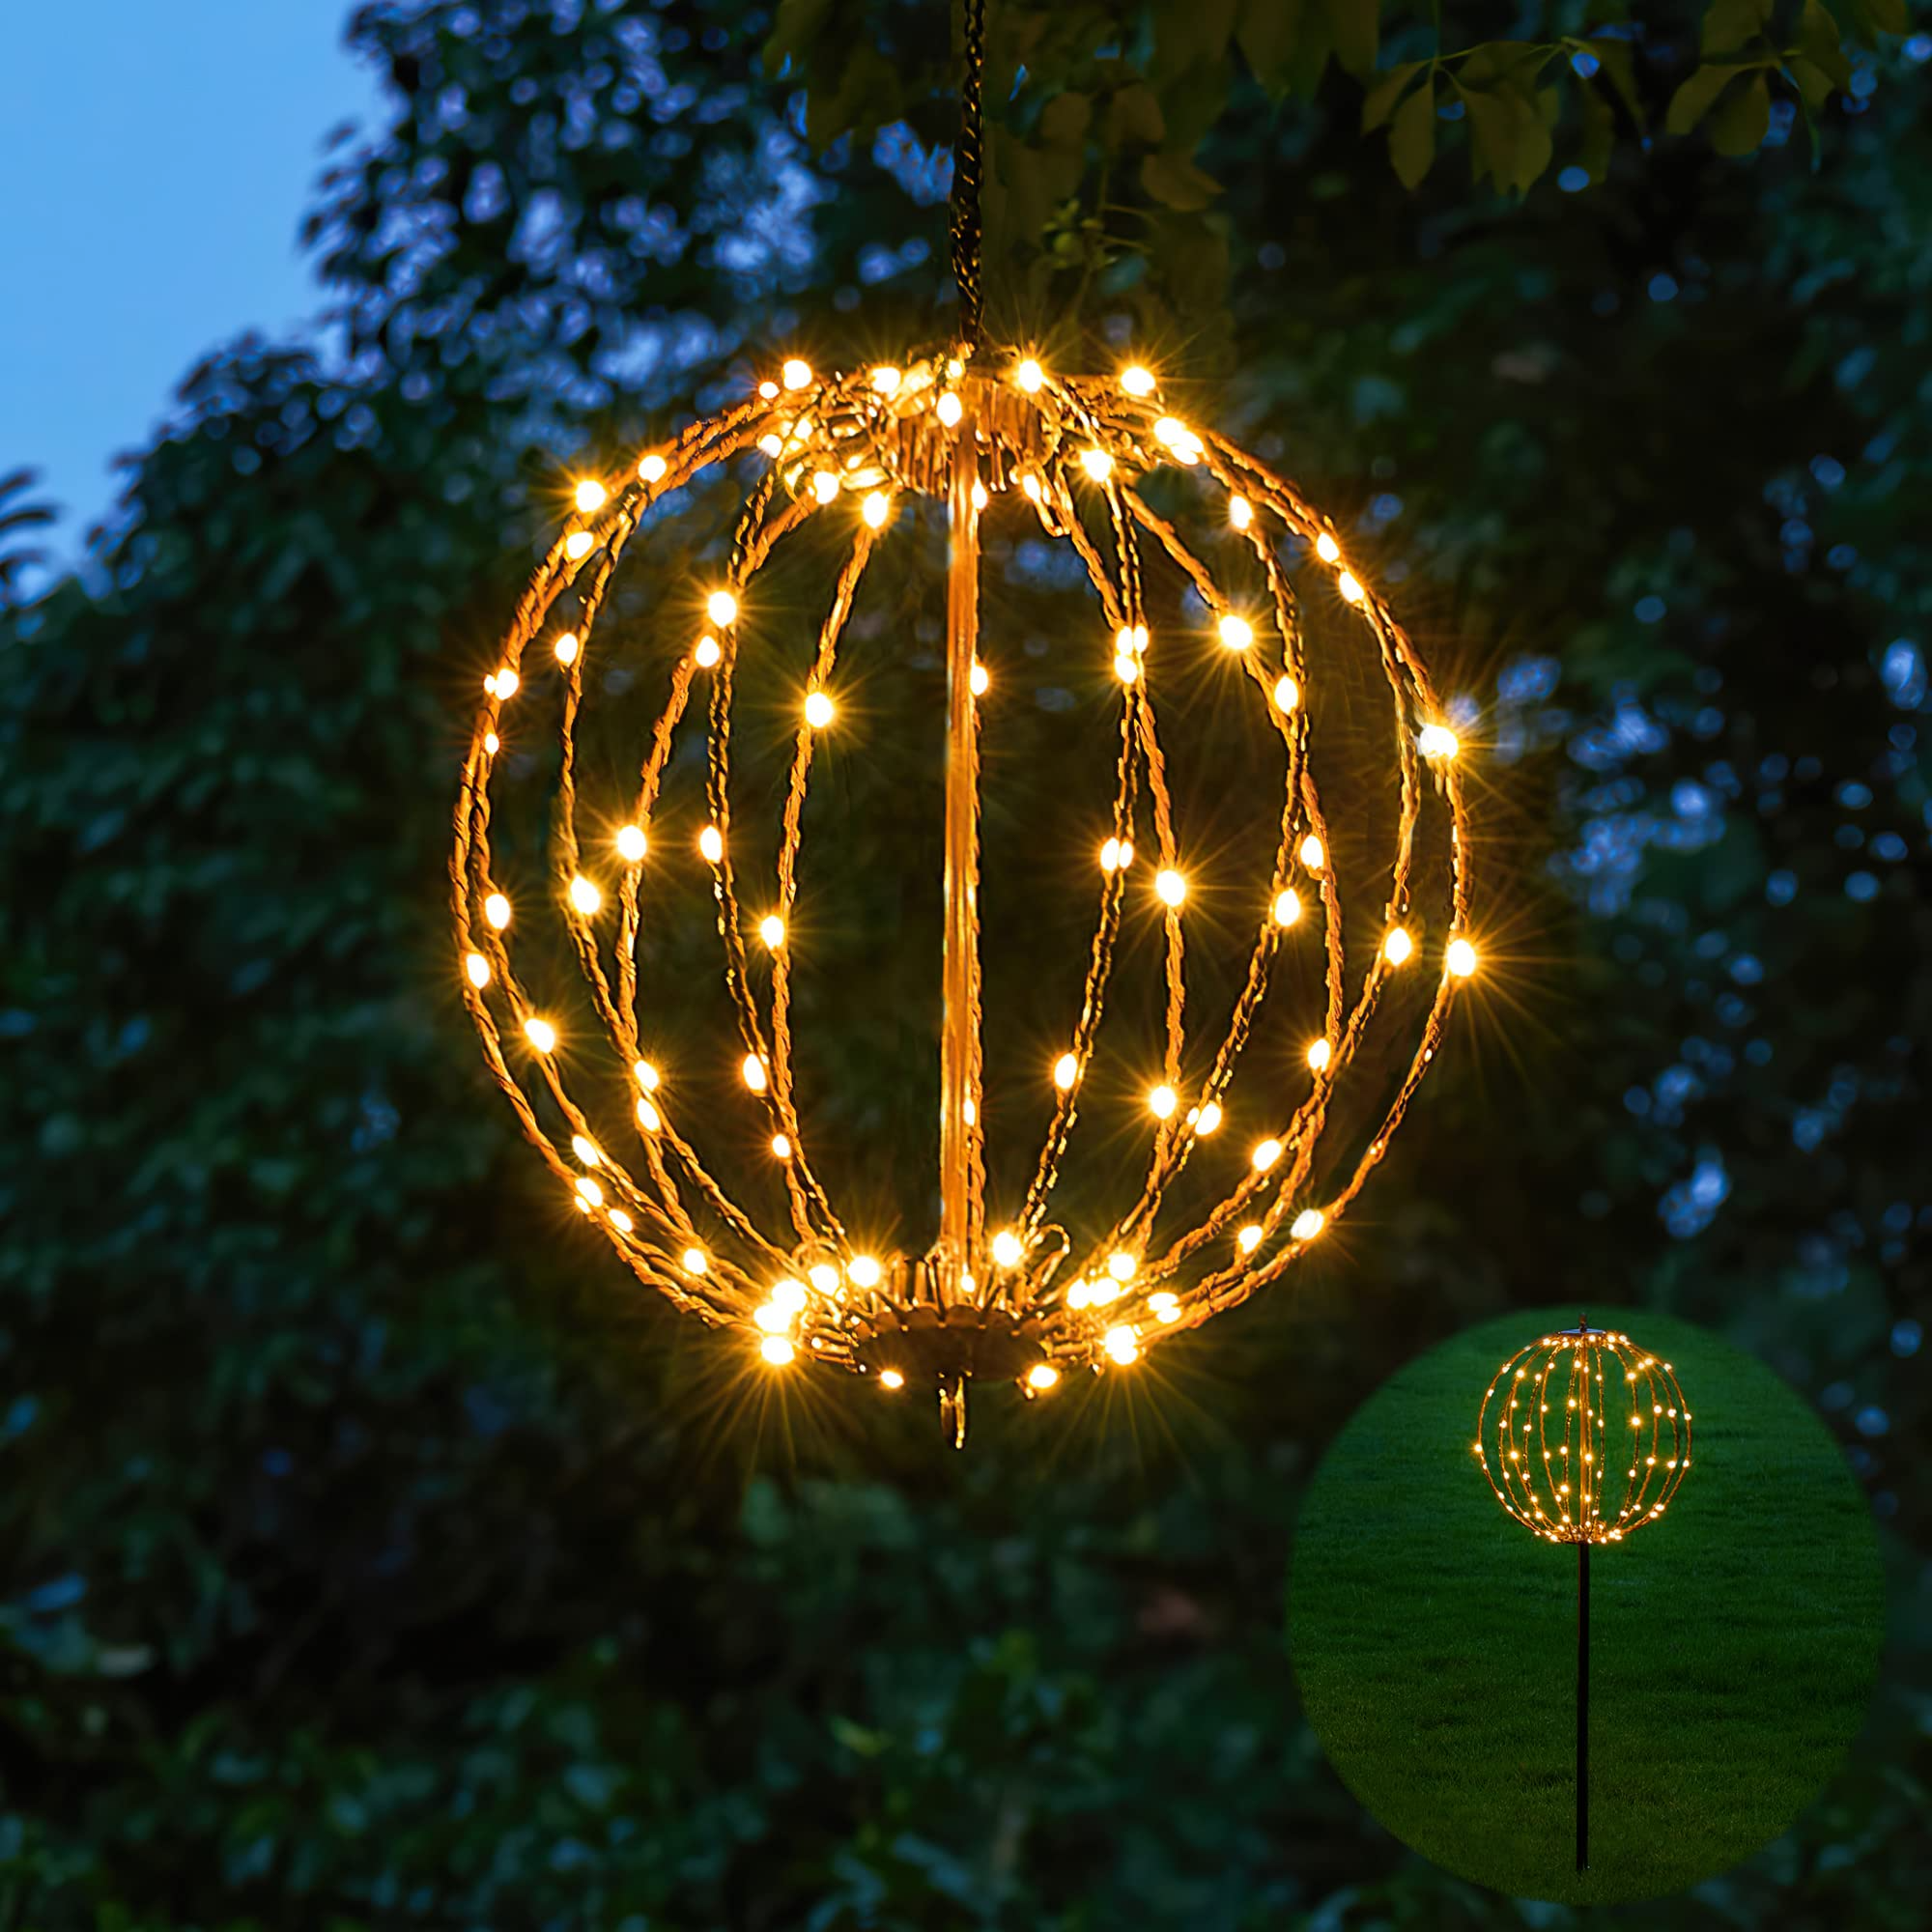 12IN 96LED Light Ball Yard Decoration Pathway Lights Sphere Light with Fold Flat Metal Frame Indoor Outdoor Waterproof Garden Lights